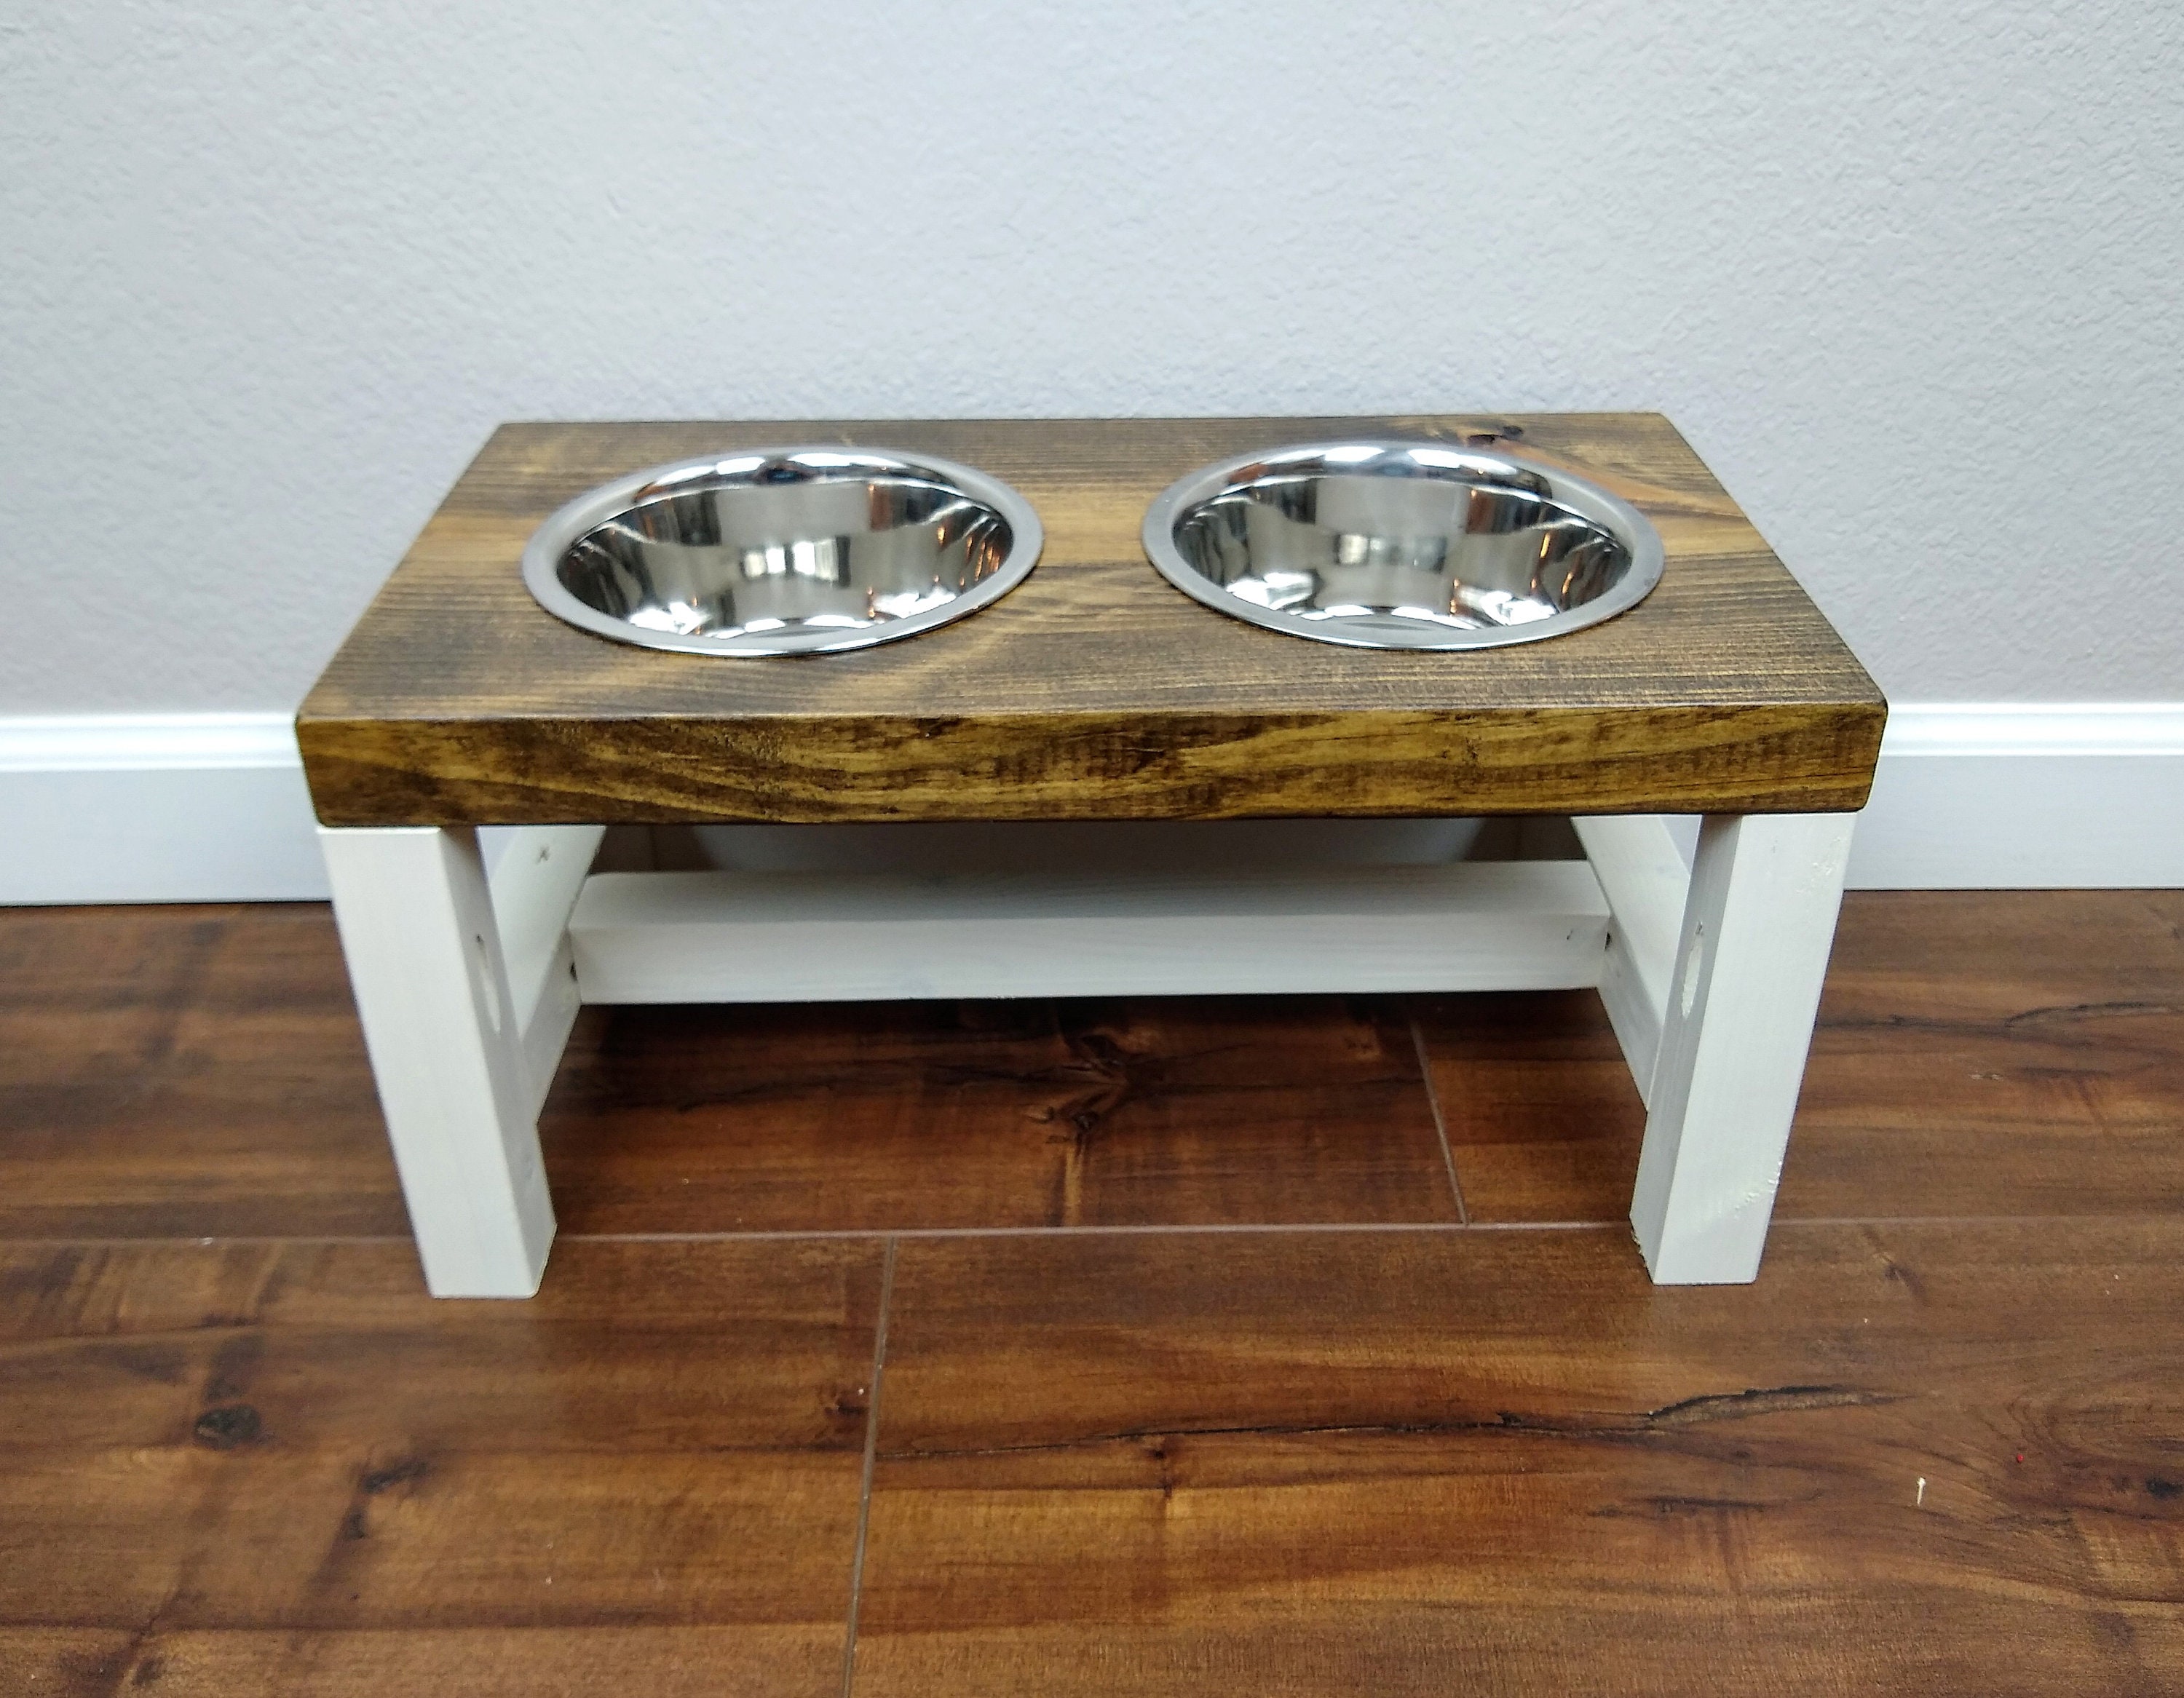 MAINEVENT Raised Dog Bowls for Medium Dogs, Modern Farmhouse Dog Bowl Stands,  Wooden Elevated Dog Bowl Stand for Medium Dog Breed brown 